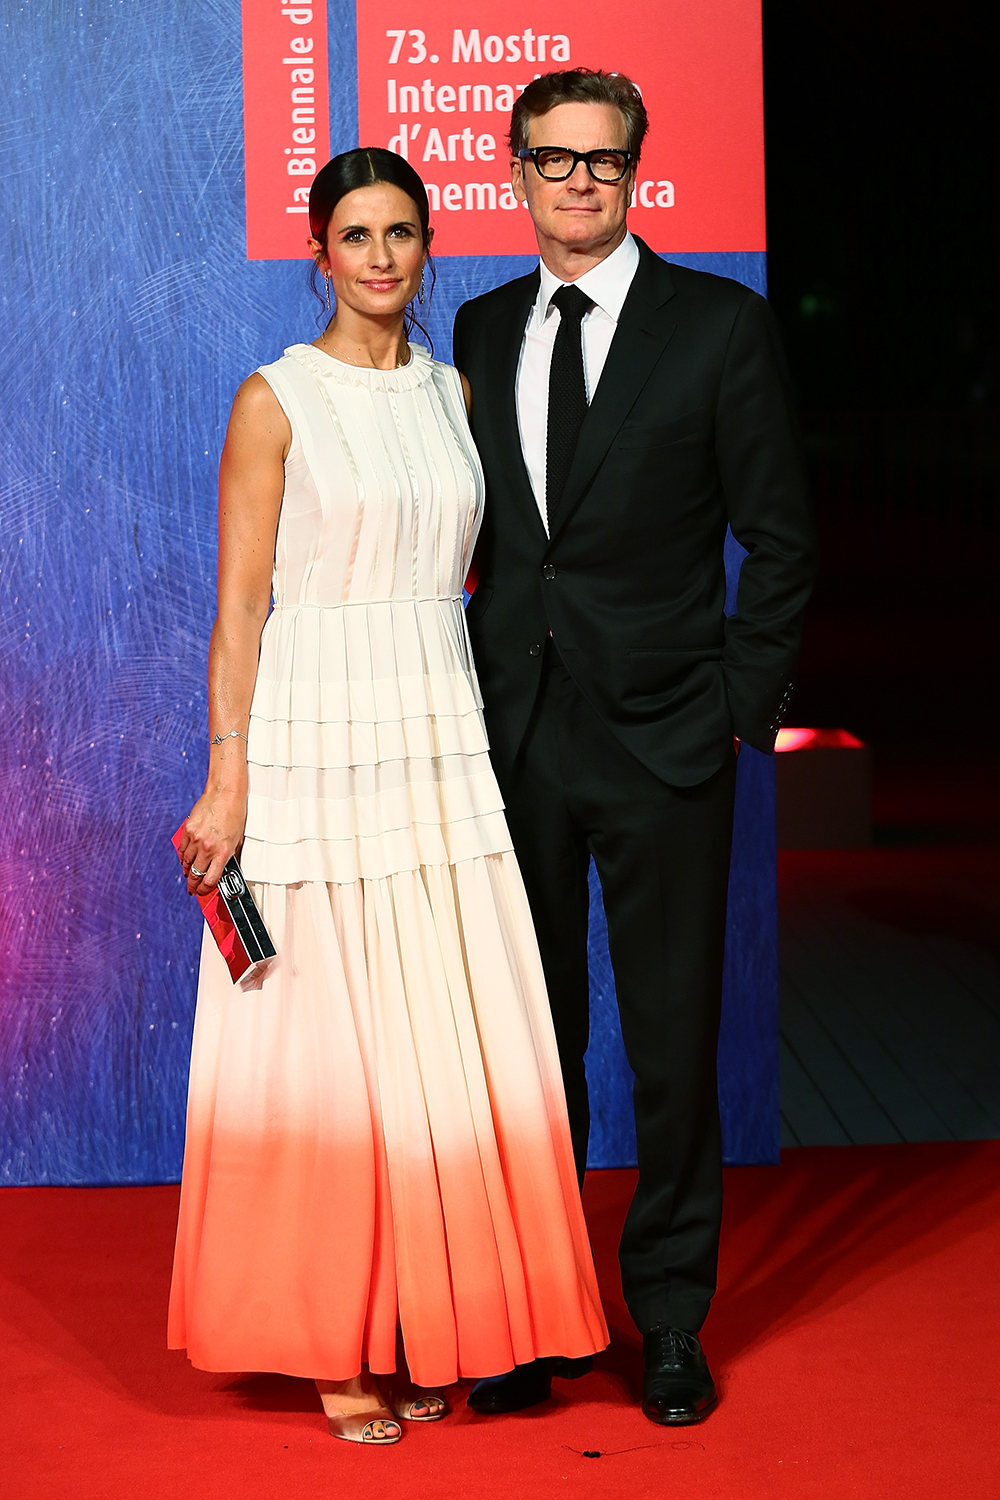 Livia Giuggioli and Colin Firth at the premiere of Franca: Chaos And Creation.